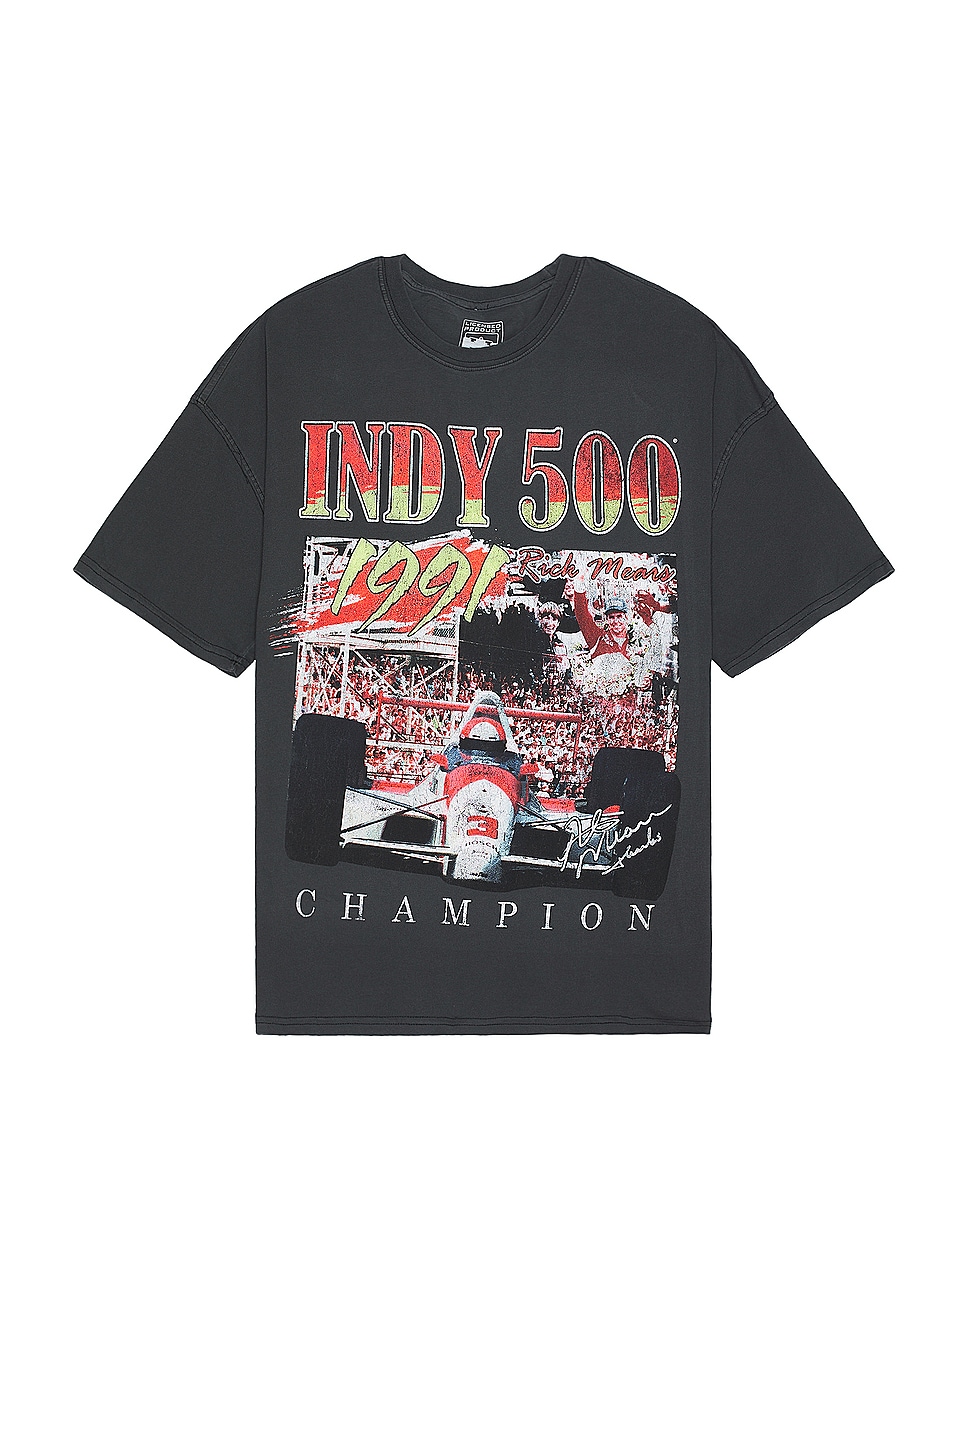 Image 1 of Philcos Indy 500 1991 Champion Oversized Tee in Black Pigment